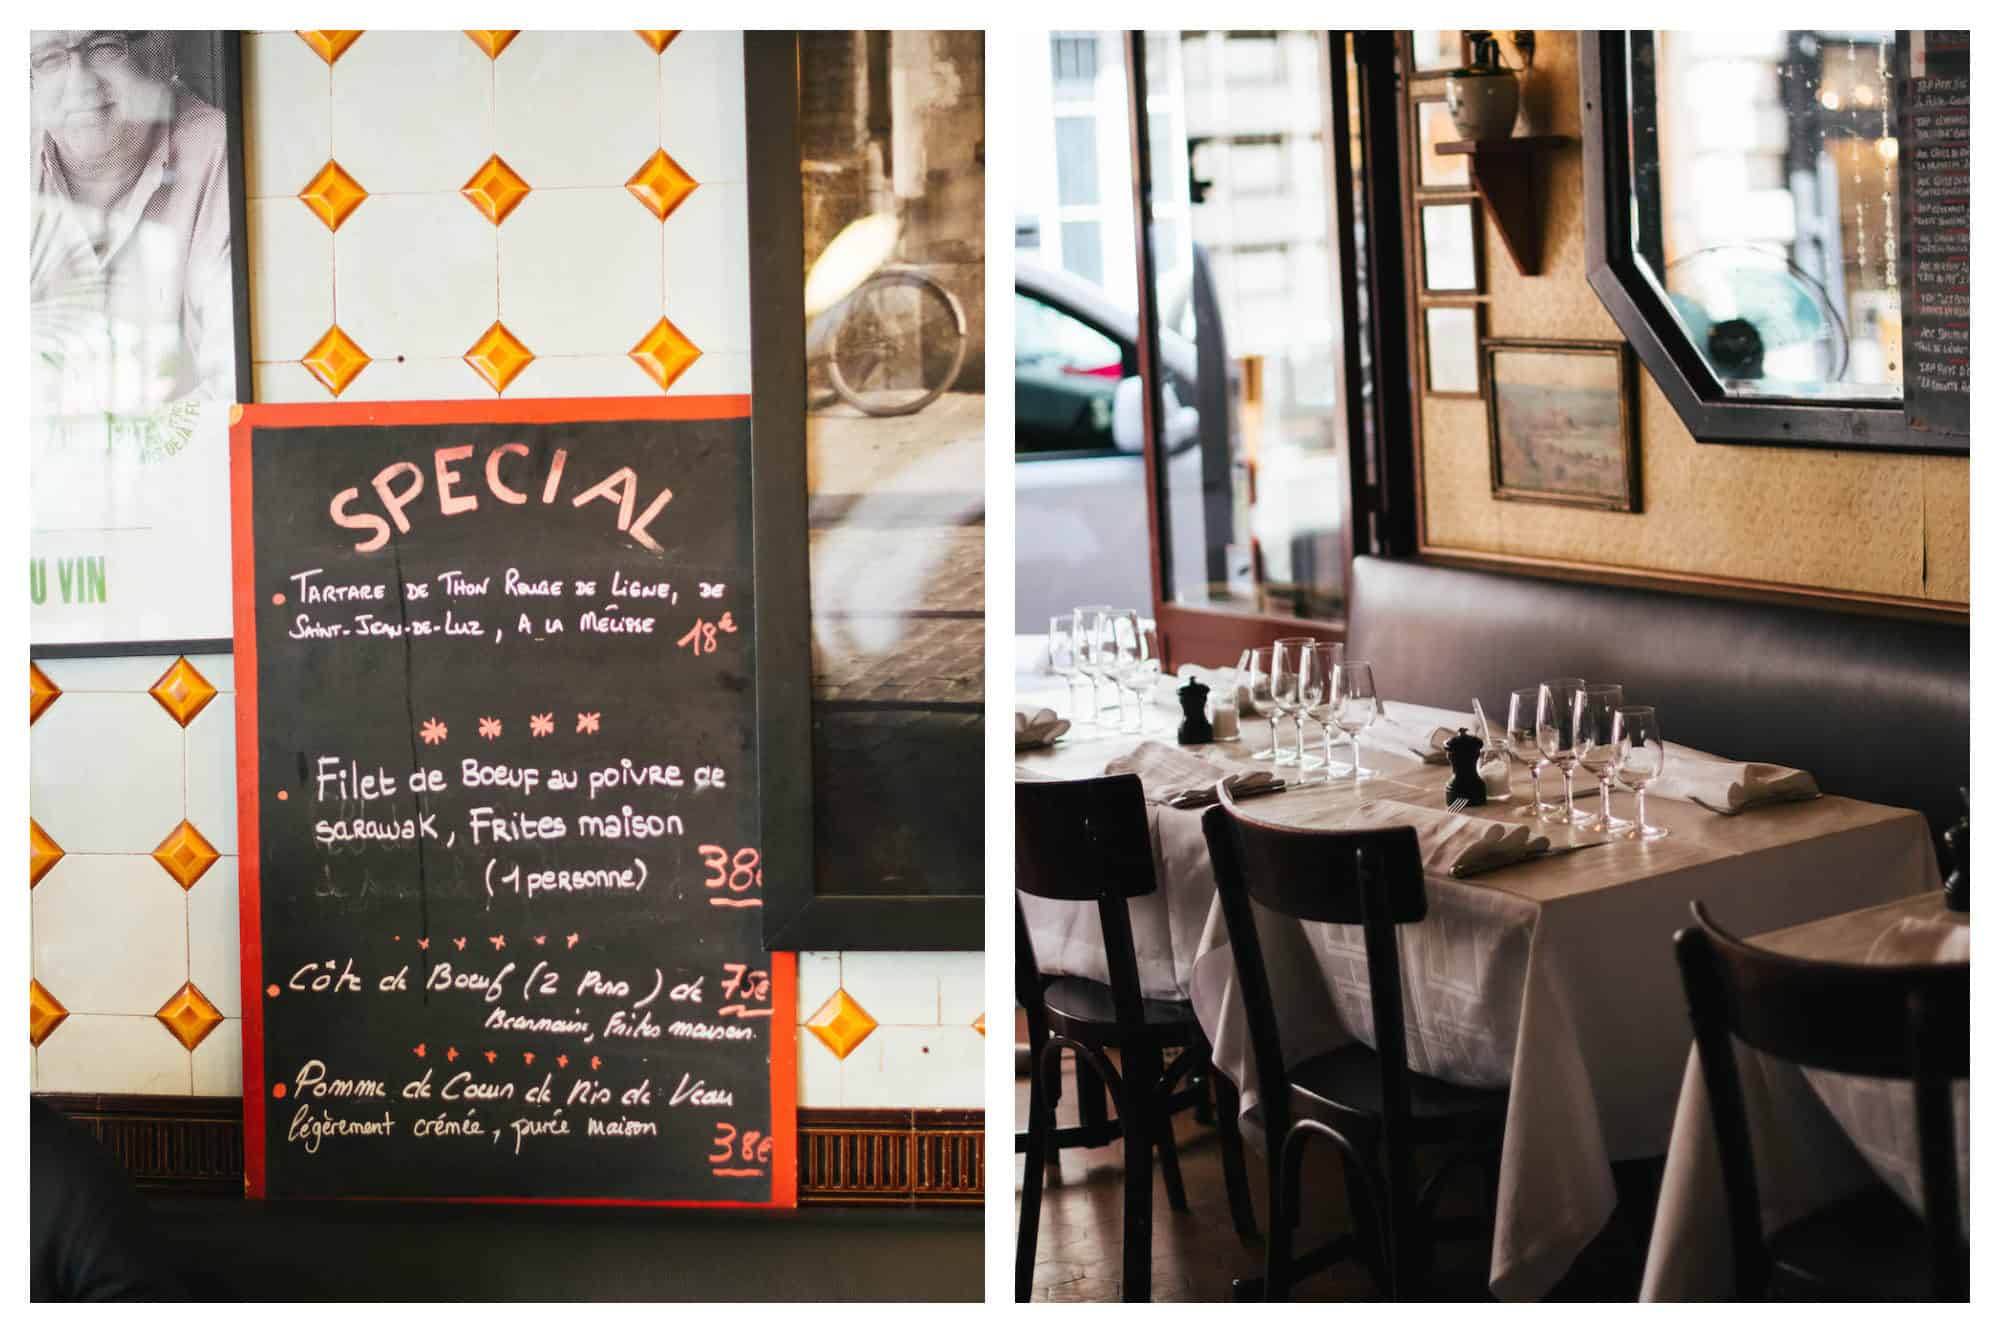 A specals' board outside the Bistrot Paul Bert in Paris (left). The leather banquettes and tables at the Bistrot Paul Bert with white tablecloths in Paris' 11th neighborhood (right).